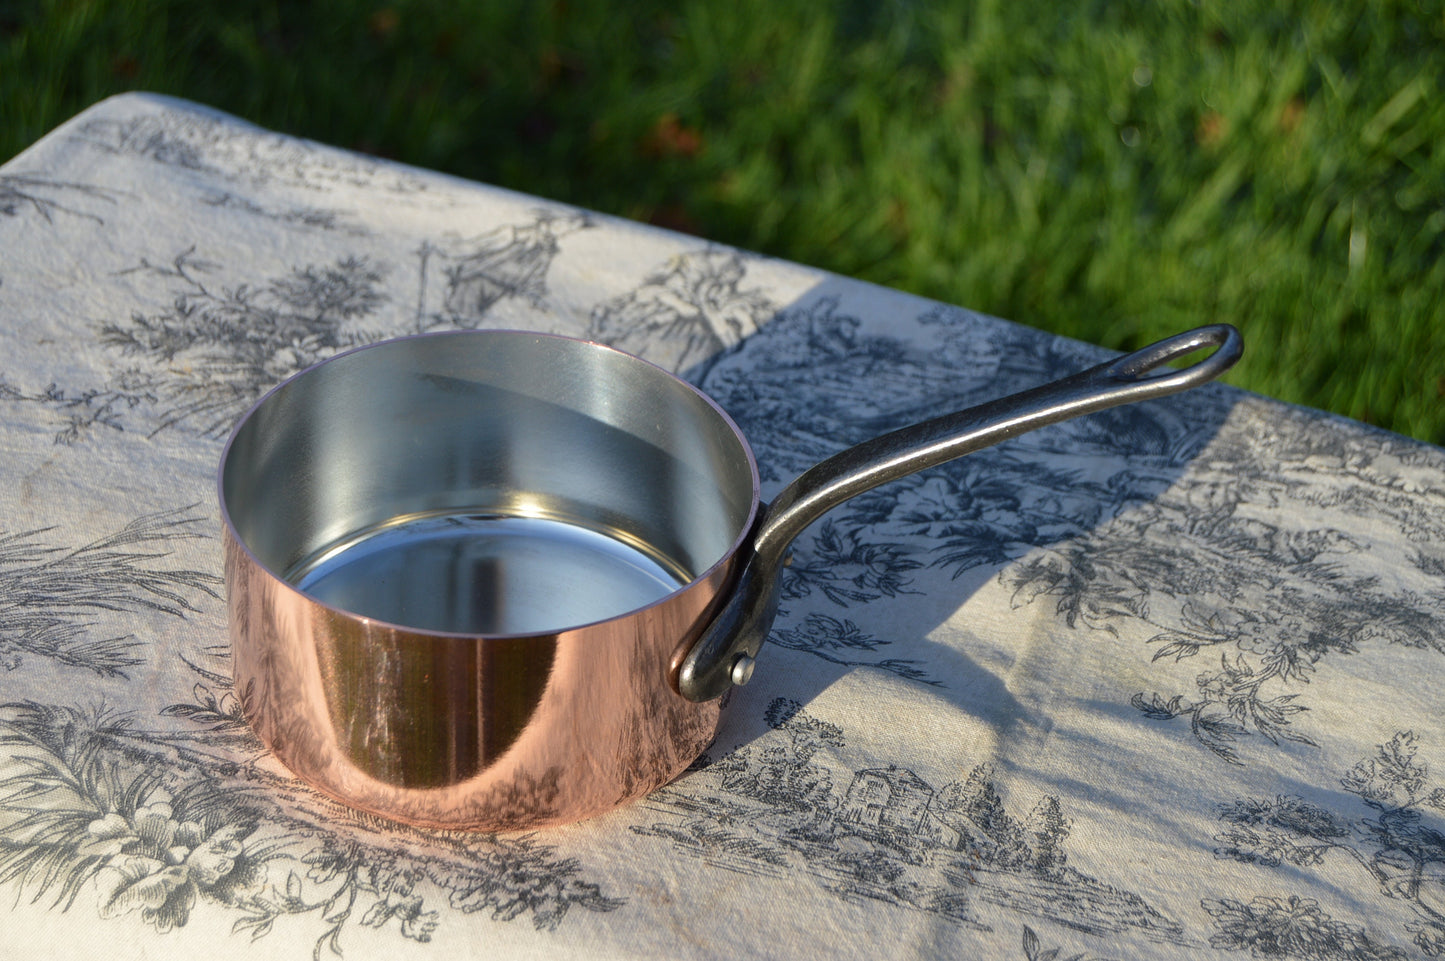 New 12cm NKC Copper Pan Tin Lined 1.4mm Professional Normandy Kitchen Copper Pot Iron Handle Steel Rivet Made in France 12cm 4 3/4" Saucepan